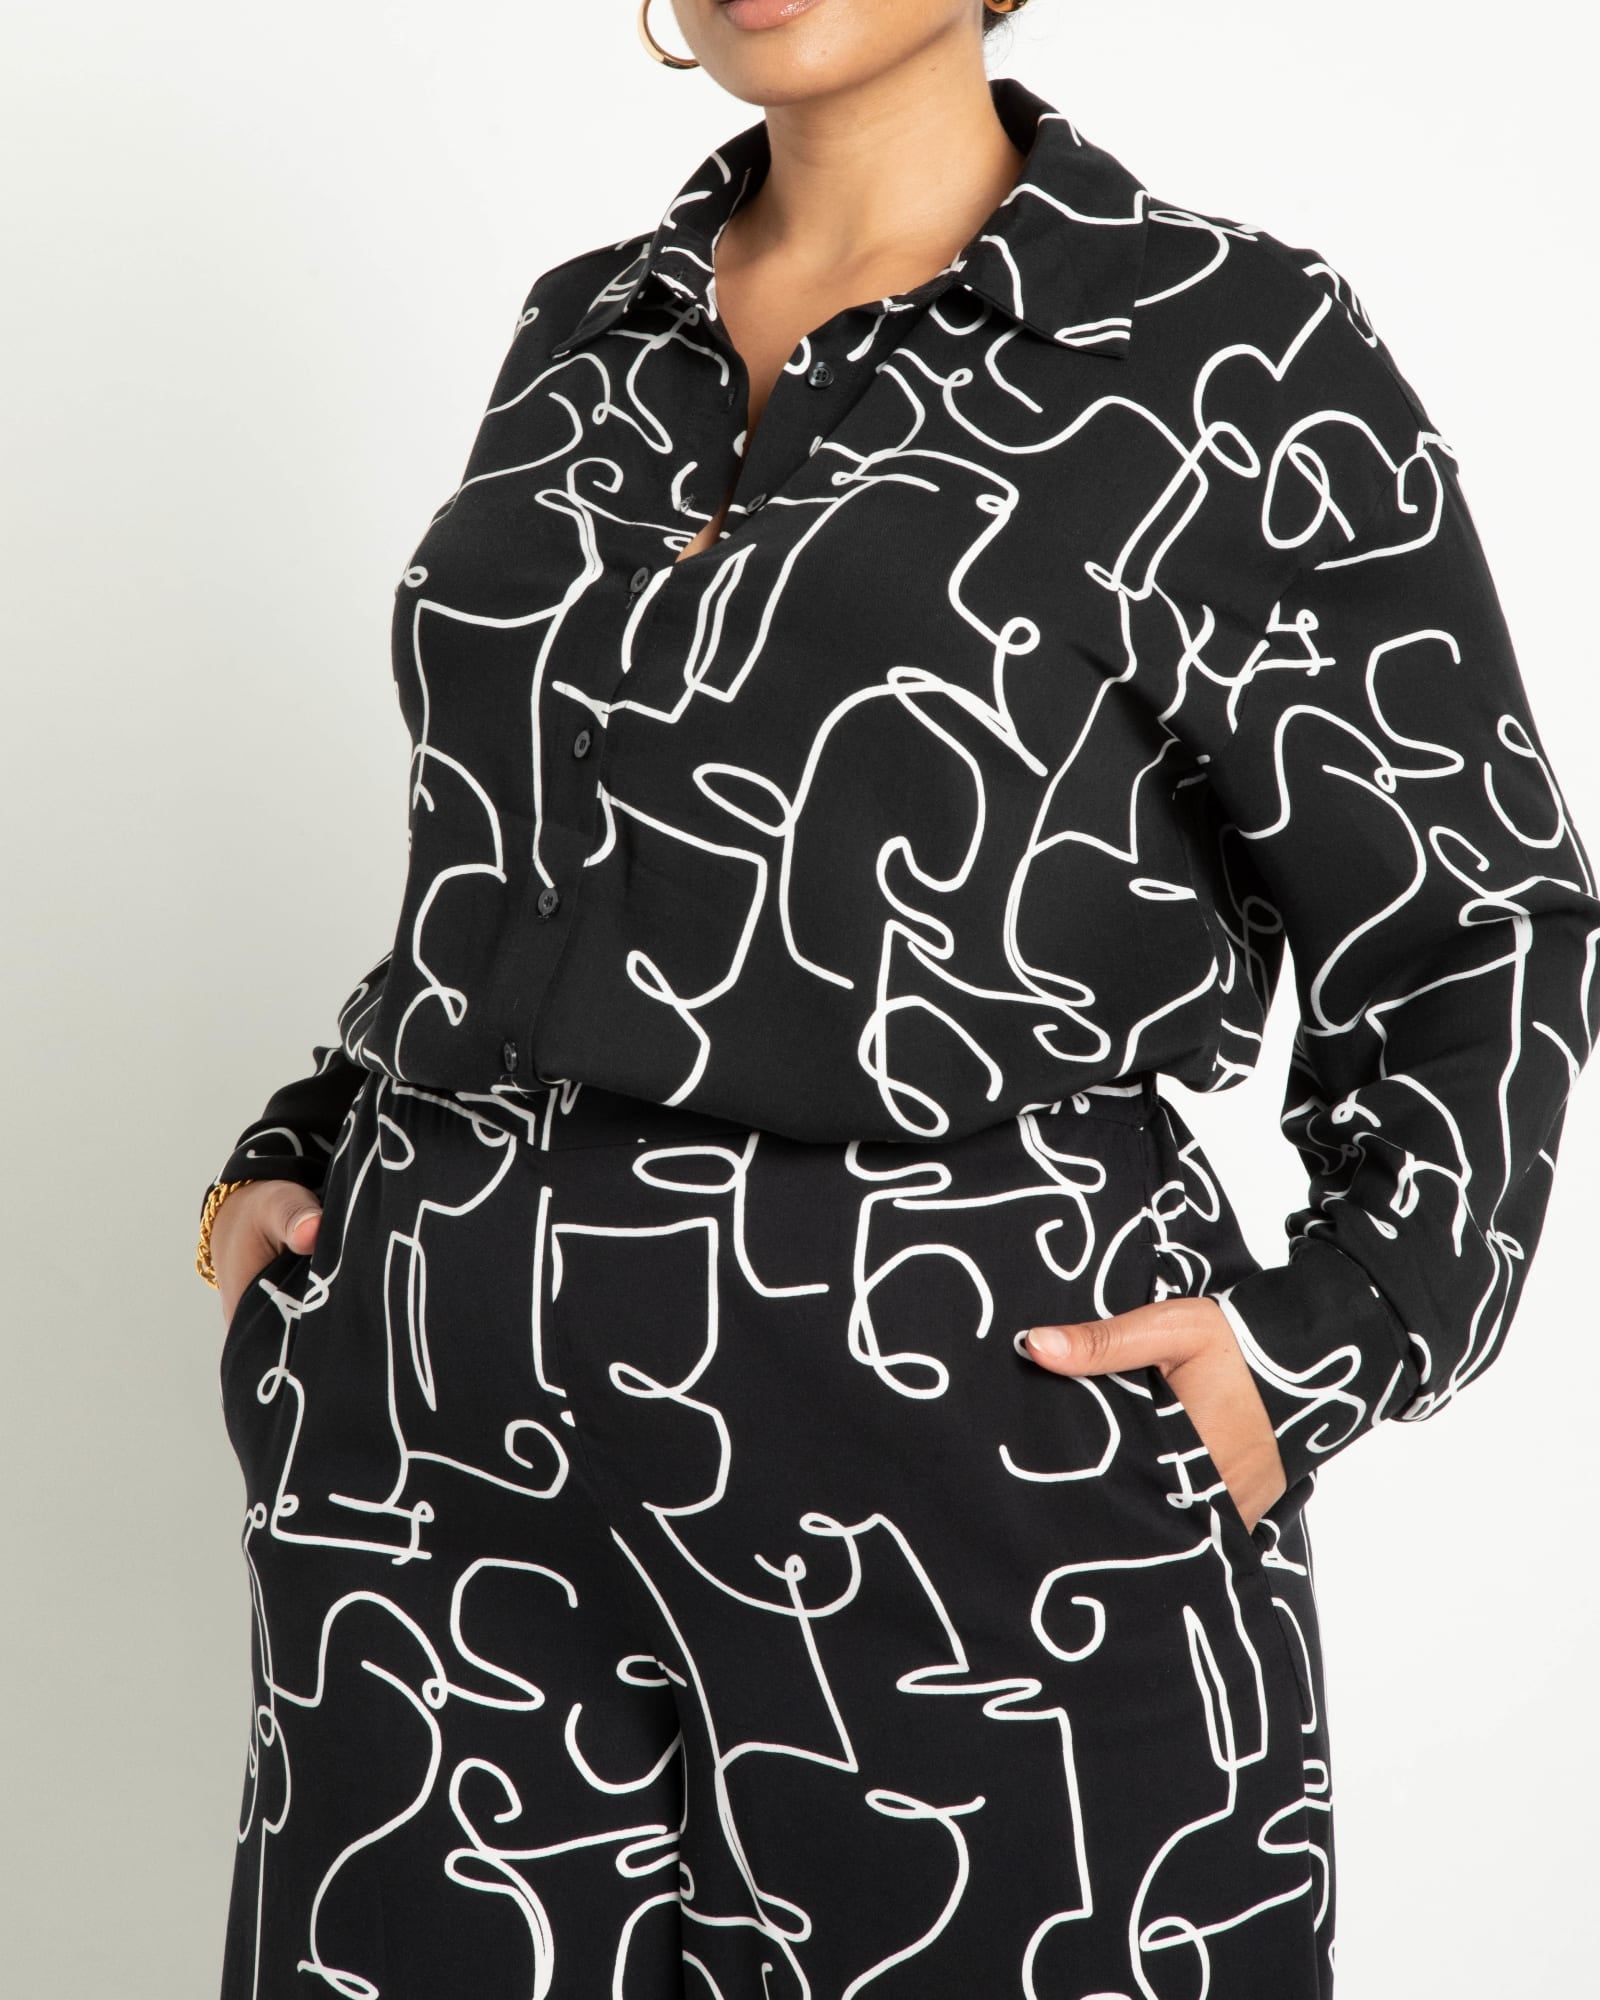 Printed Button Down | Dandy Doodle - Black And White